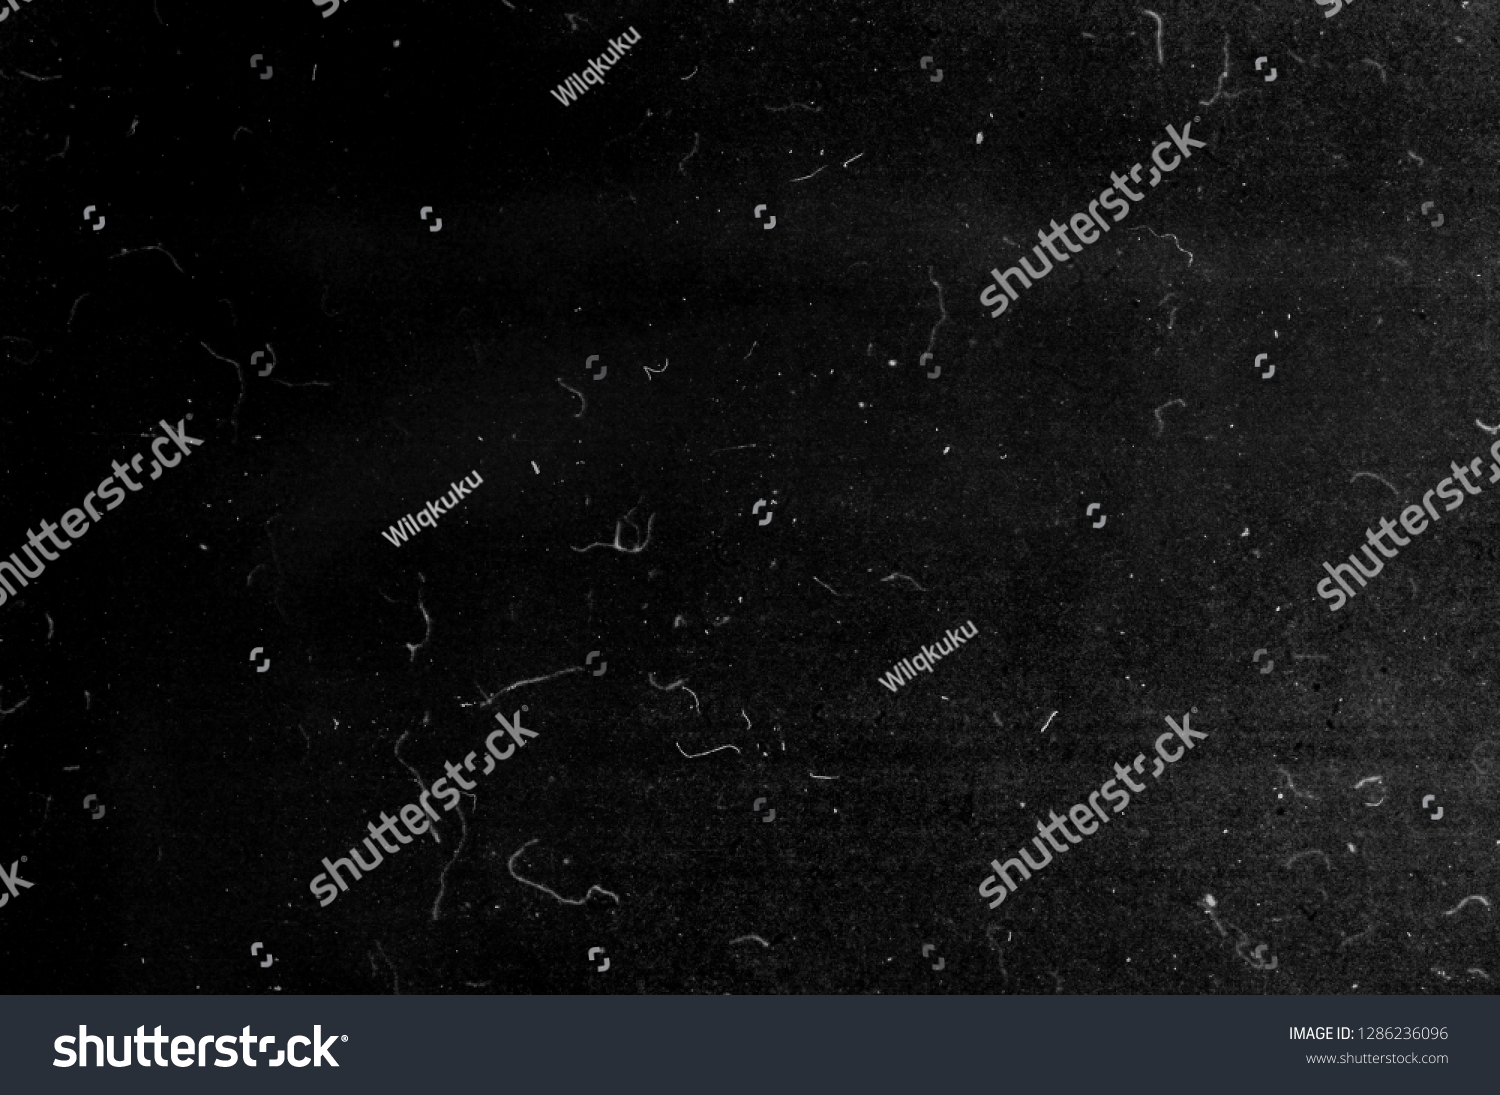 Grunge black scratched scary background, old film effect, dusty texture #1286236096